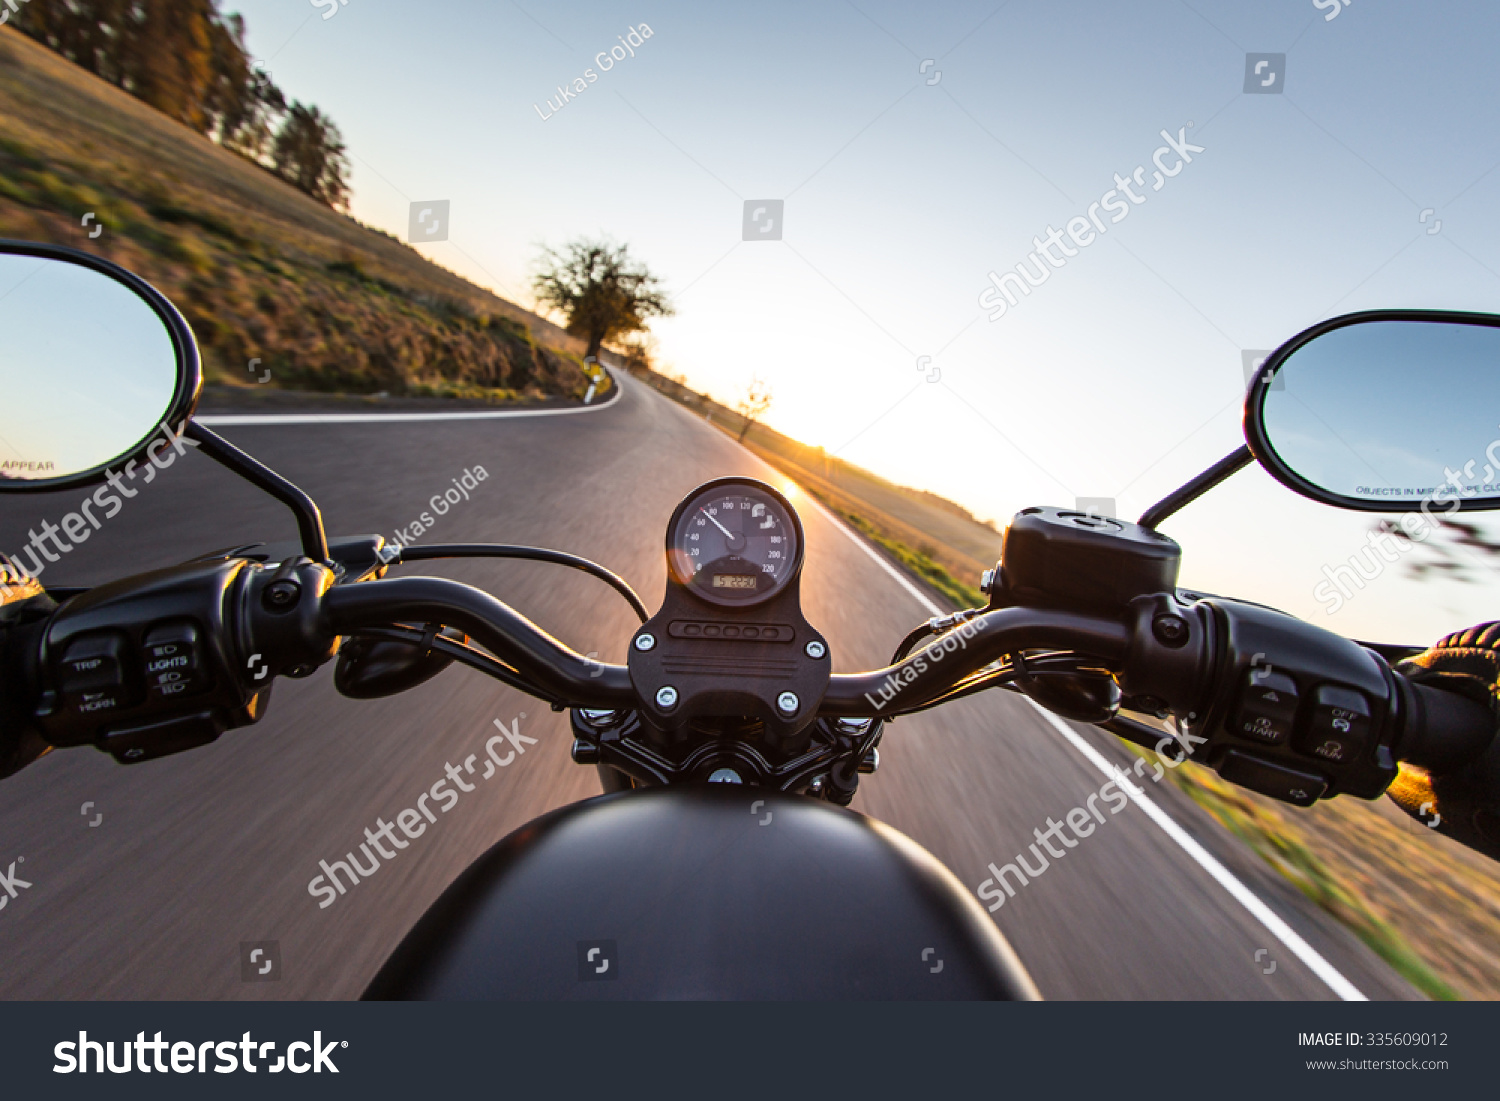 The view over the handlebars of motorcycle #335609012